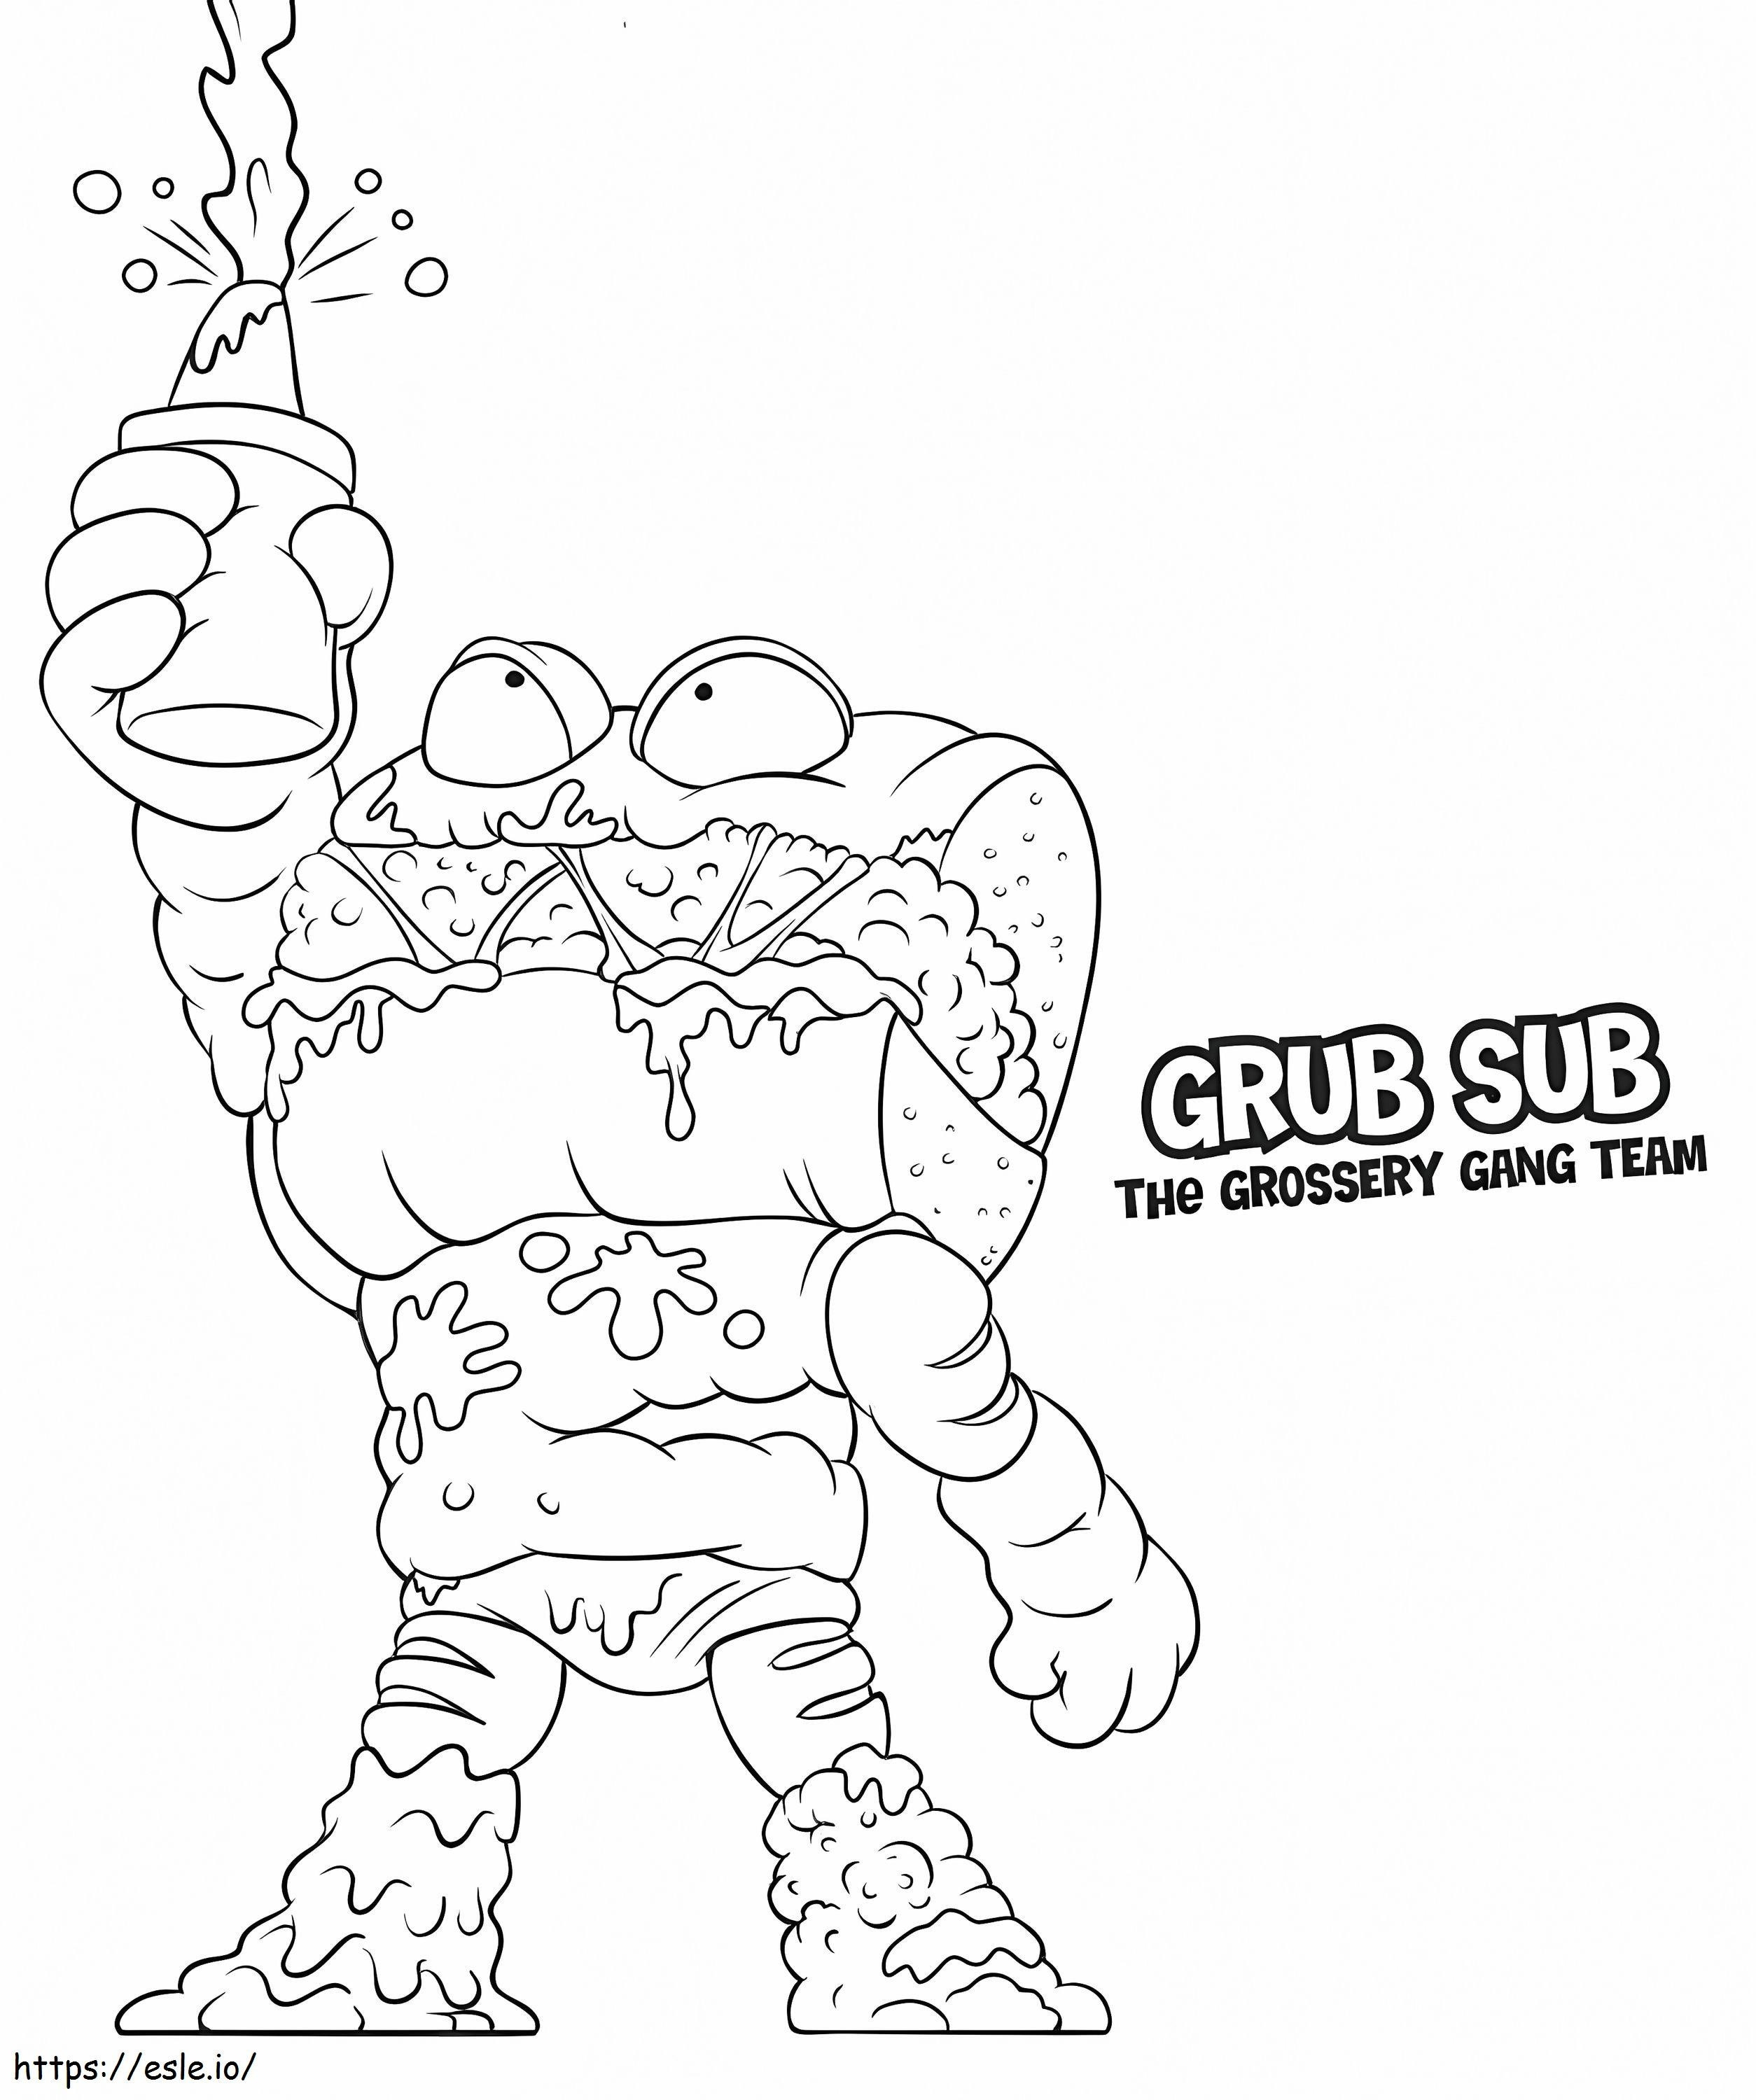 Grub Sub Grossery Gang coloring page